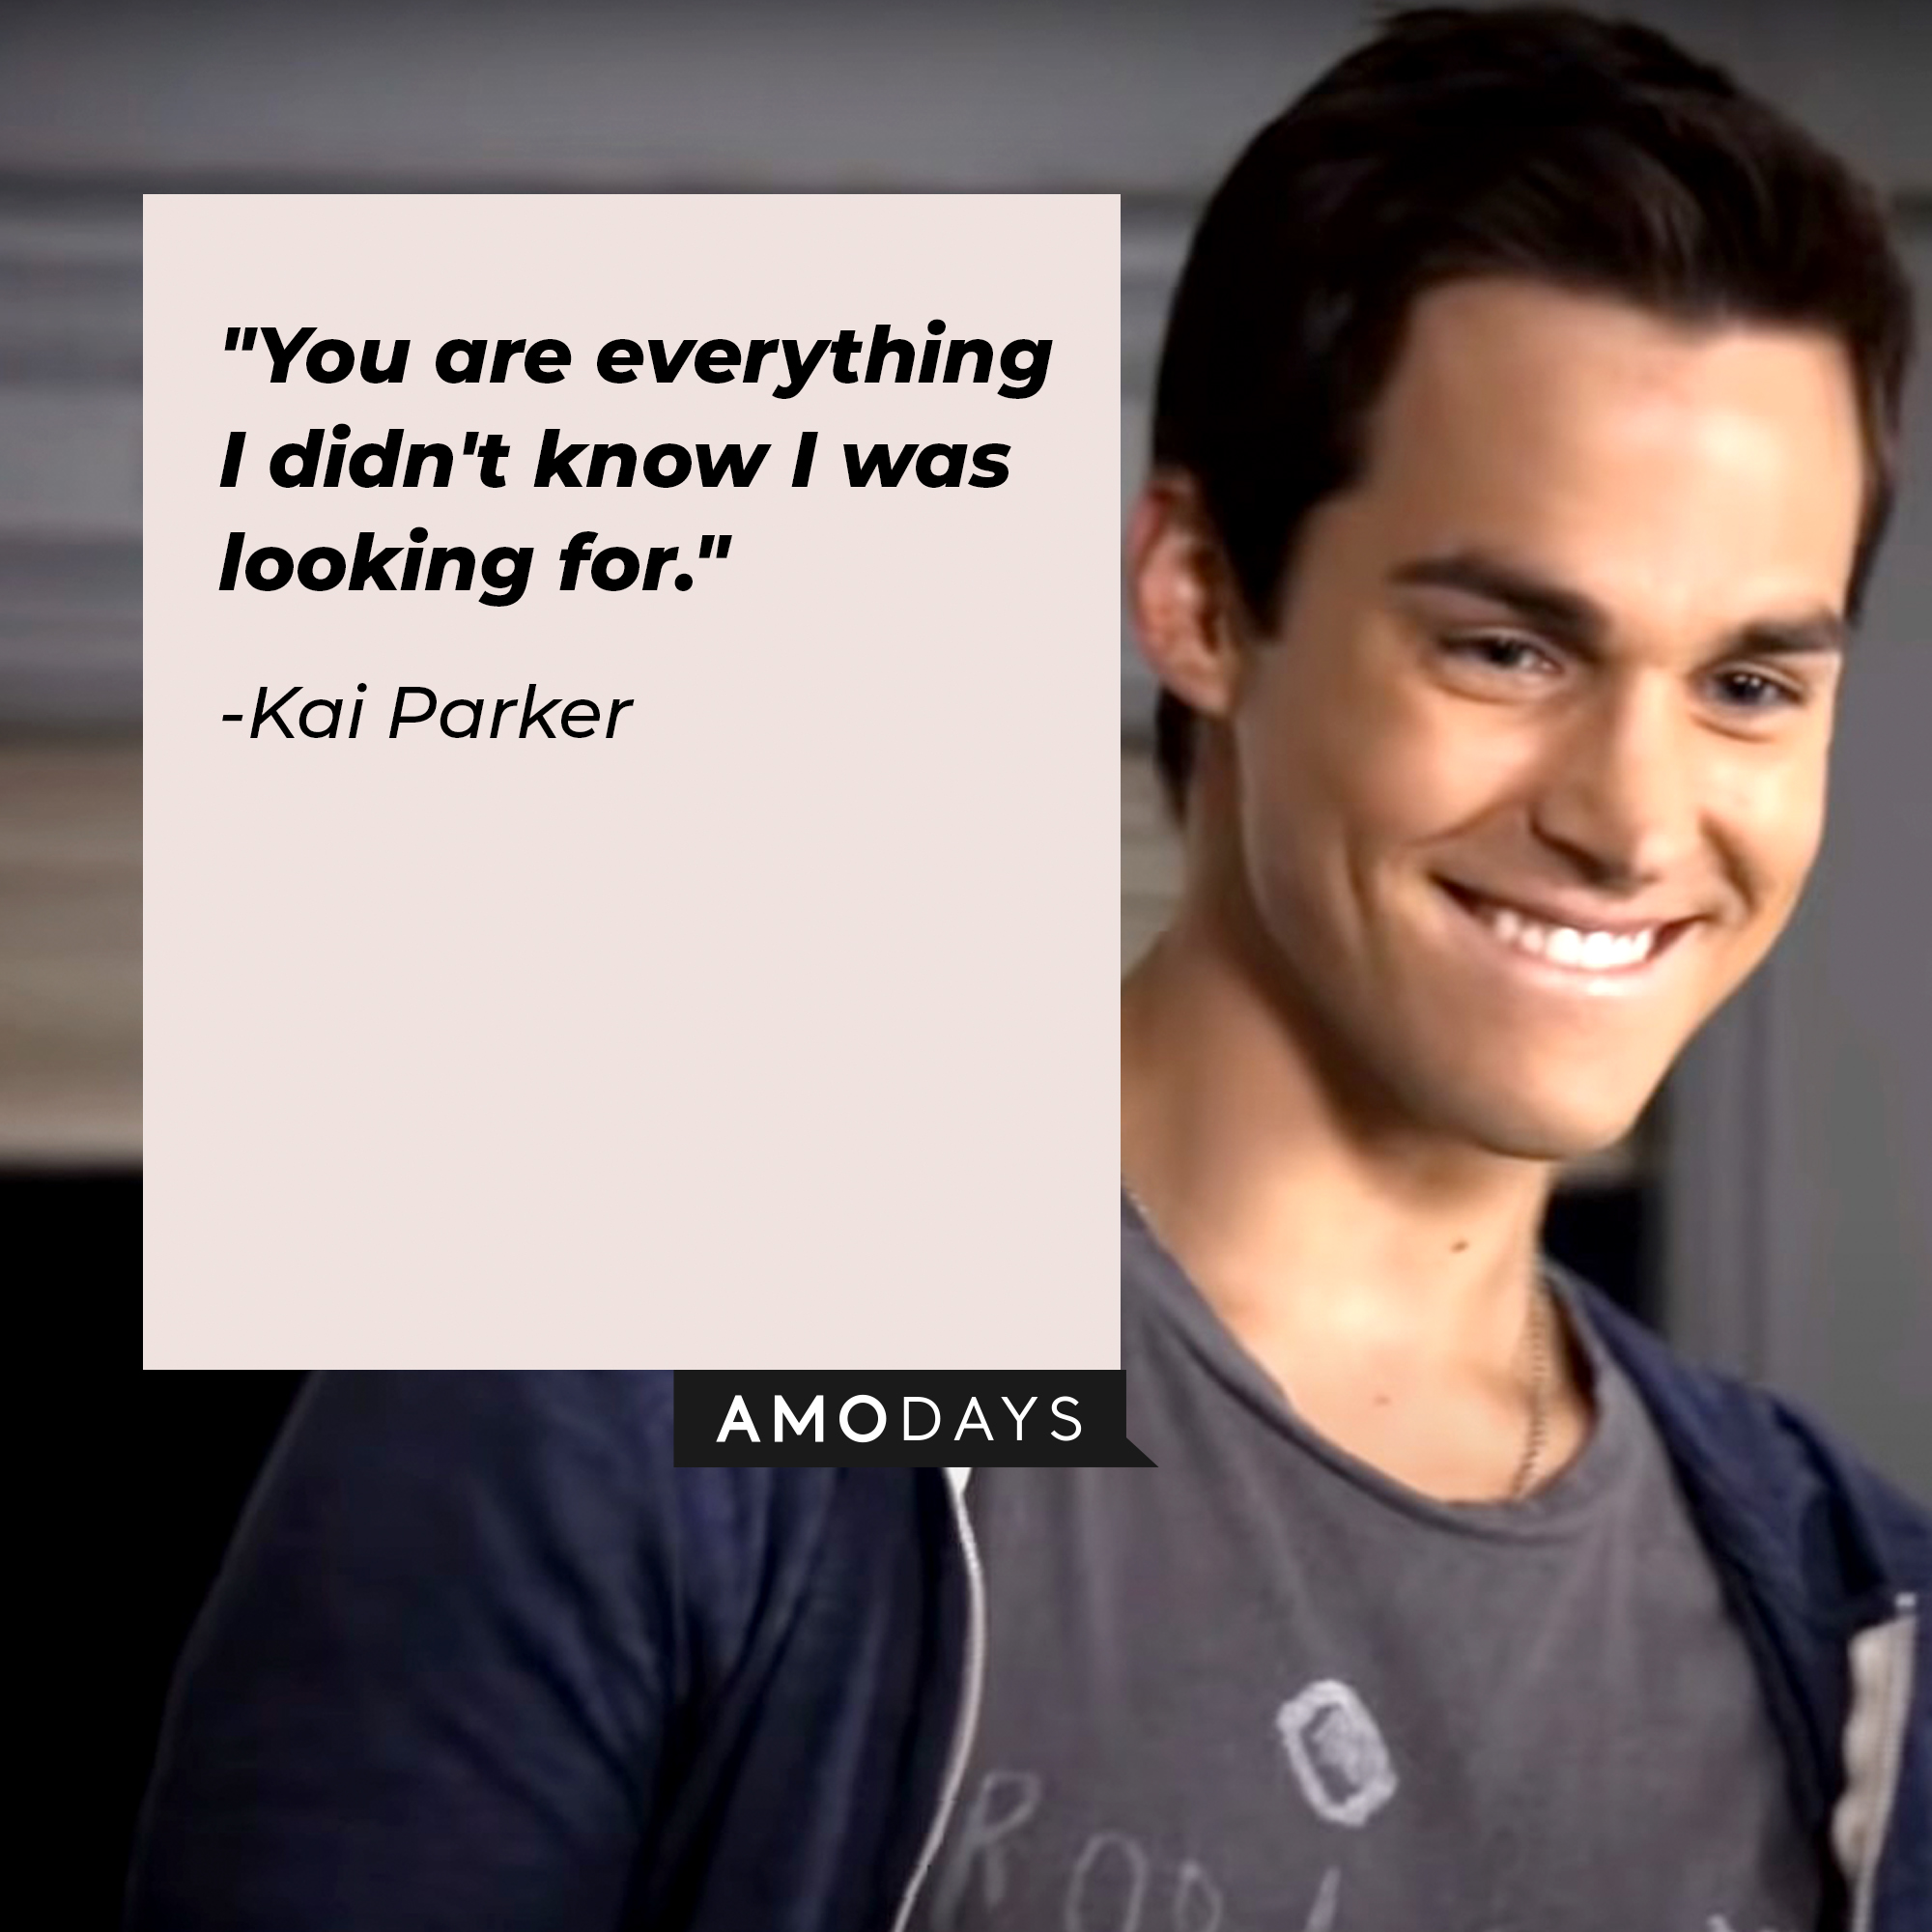 Kai Parker's quote: "You are everything I didn't know I was looking for." | Source: Facebook.com/thevampirediaries